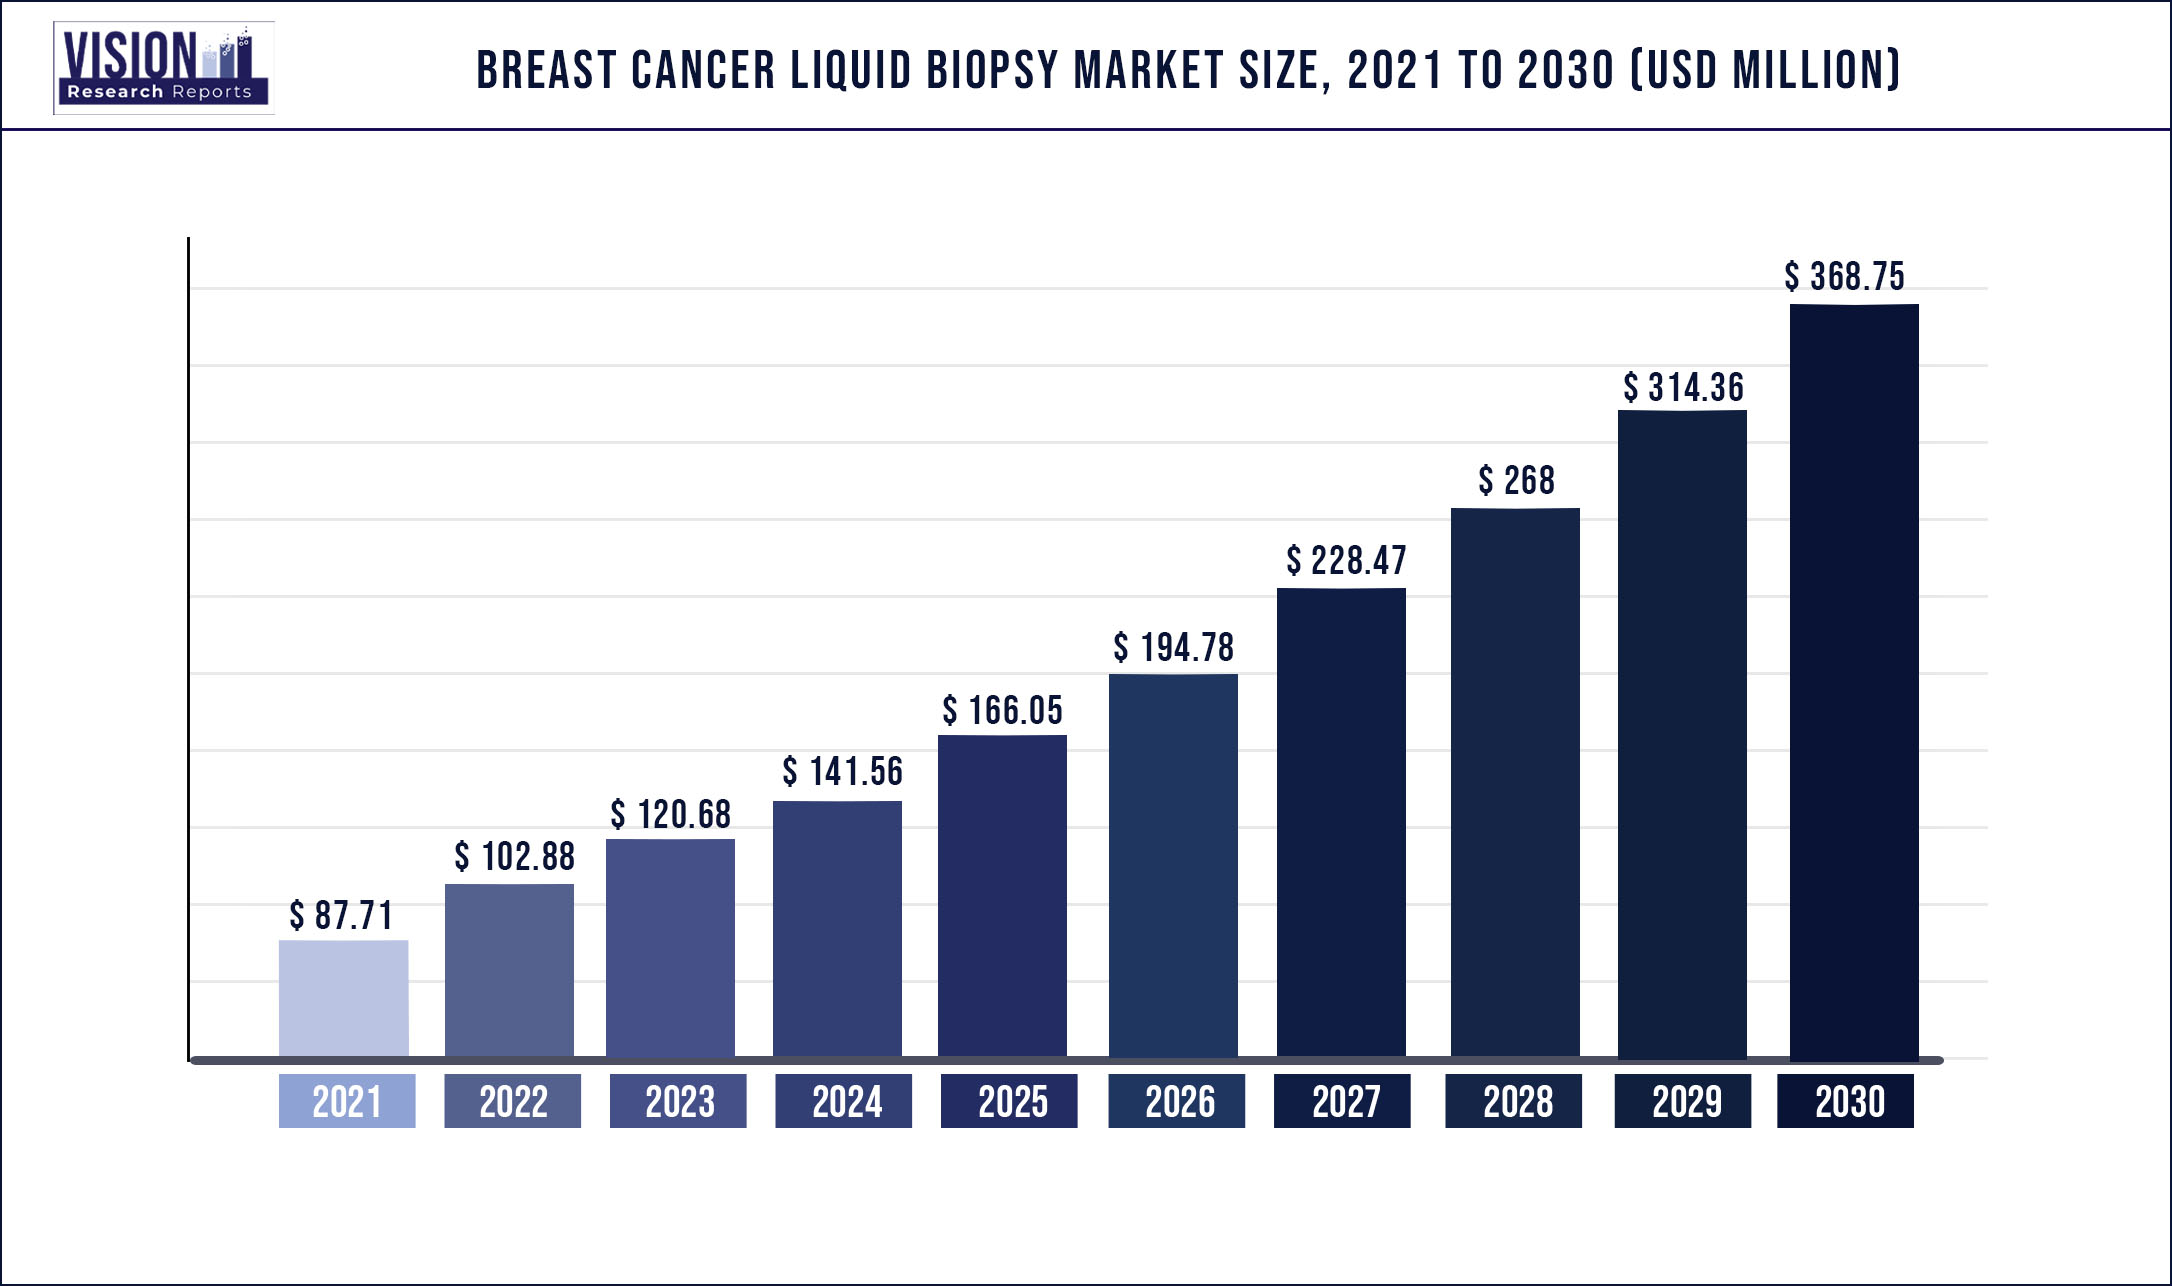 Breast Cancer Liquid Biopsy Market Size 2021 to 2030